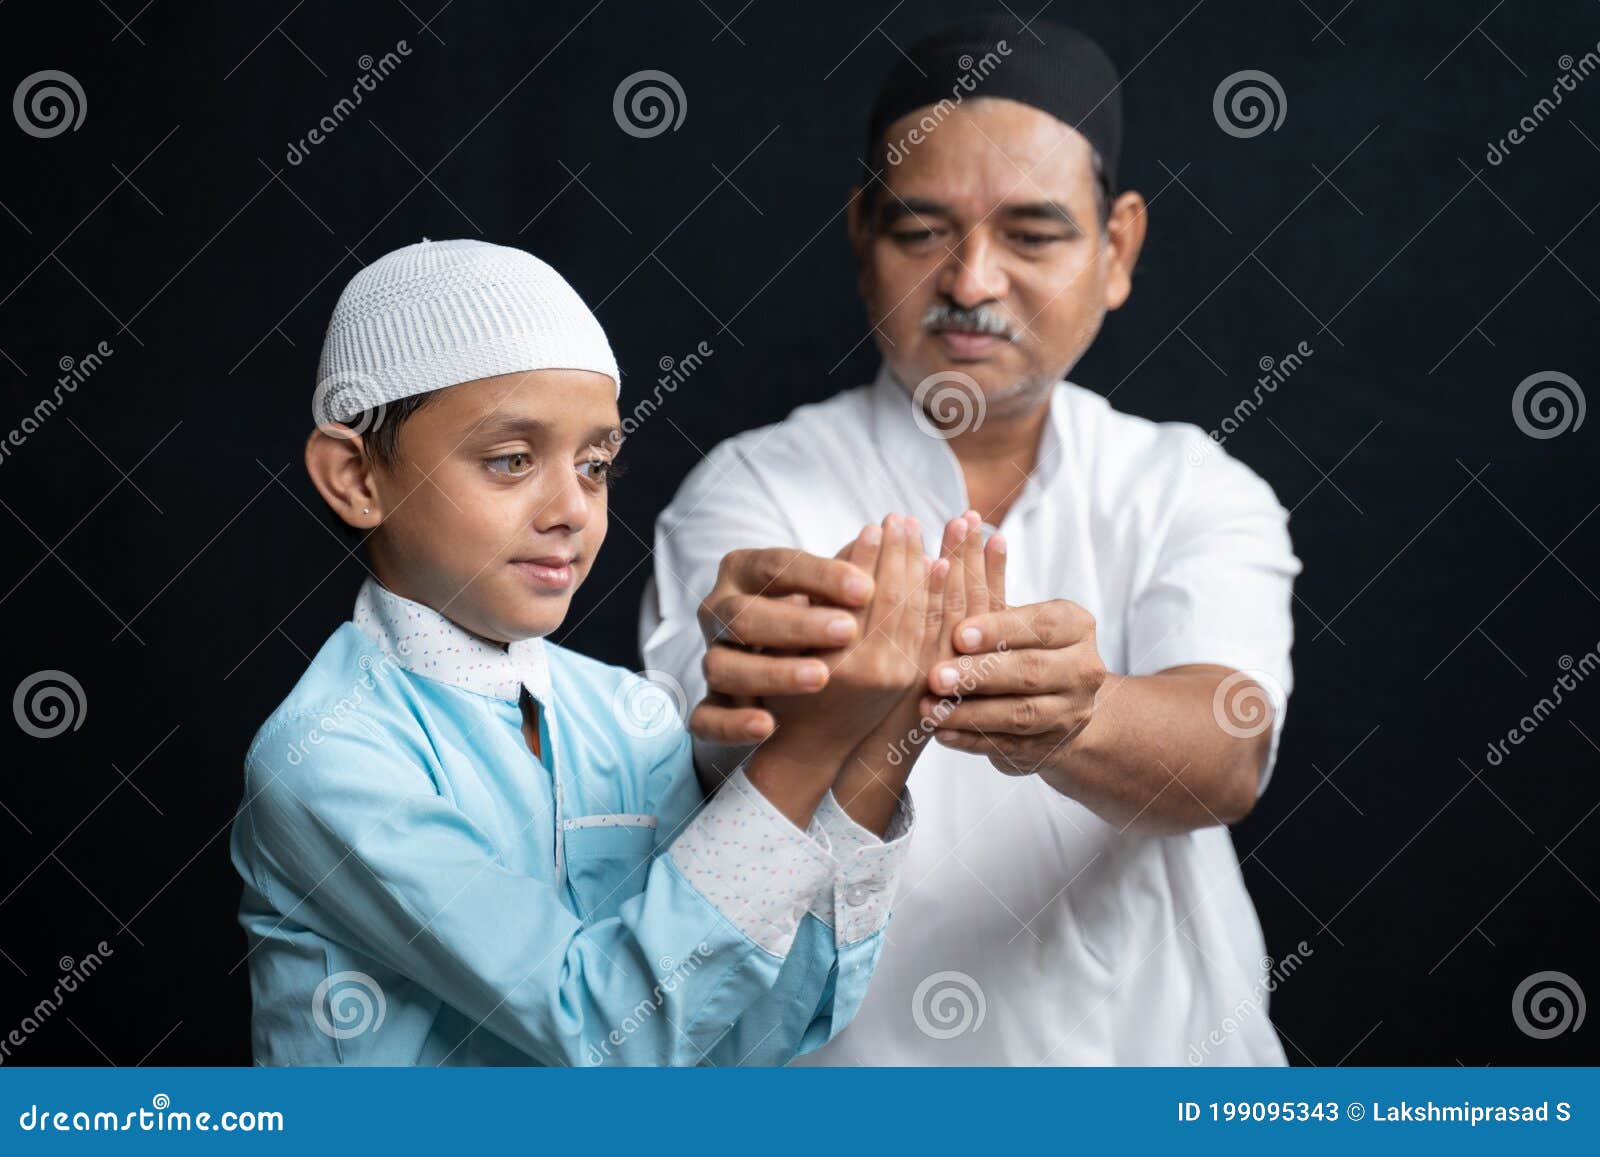 muslim father teaching his son how to do salah or payer in a islamic way.